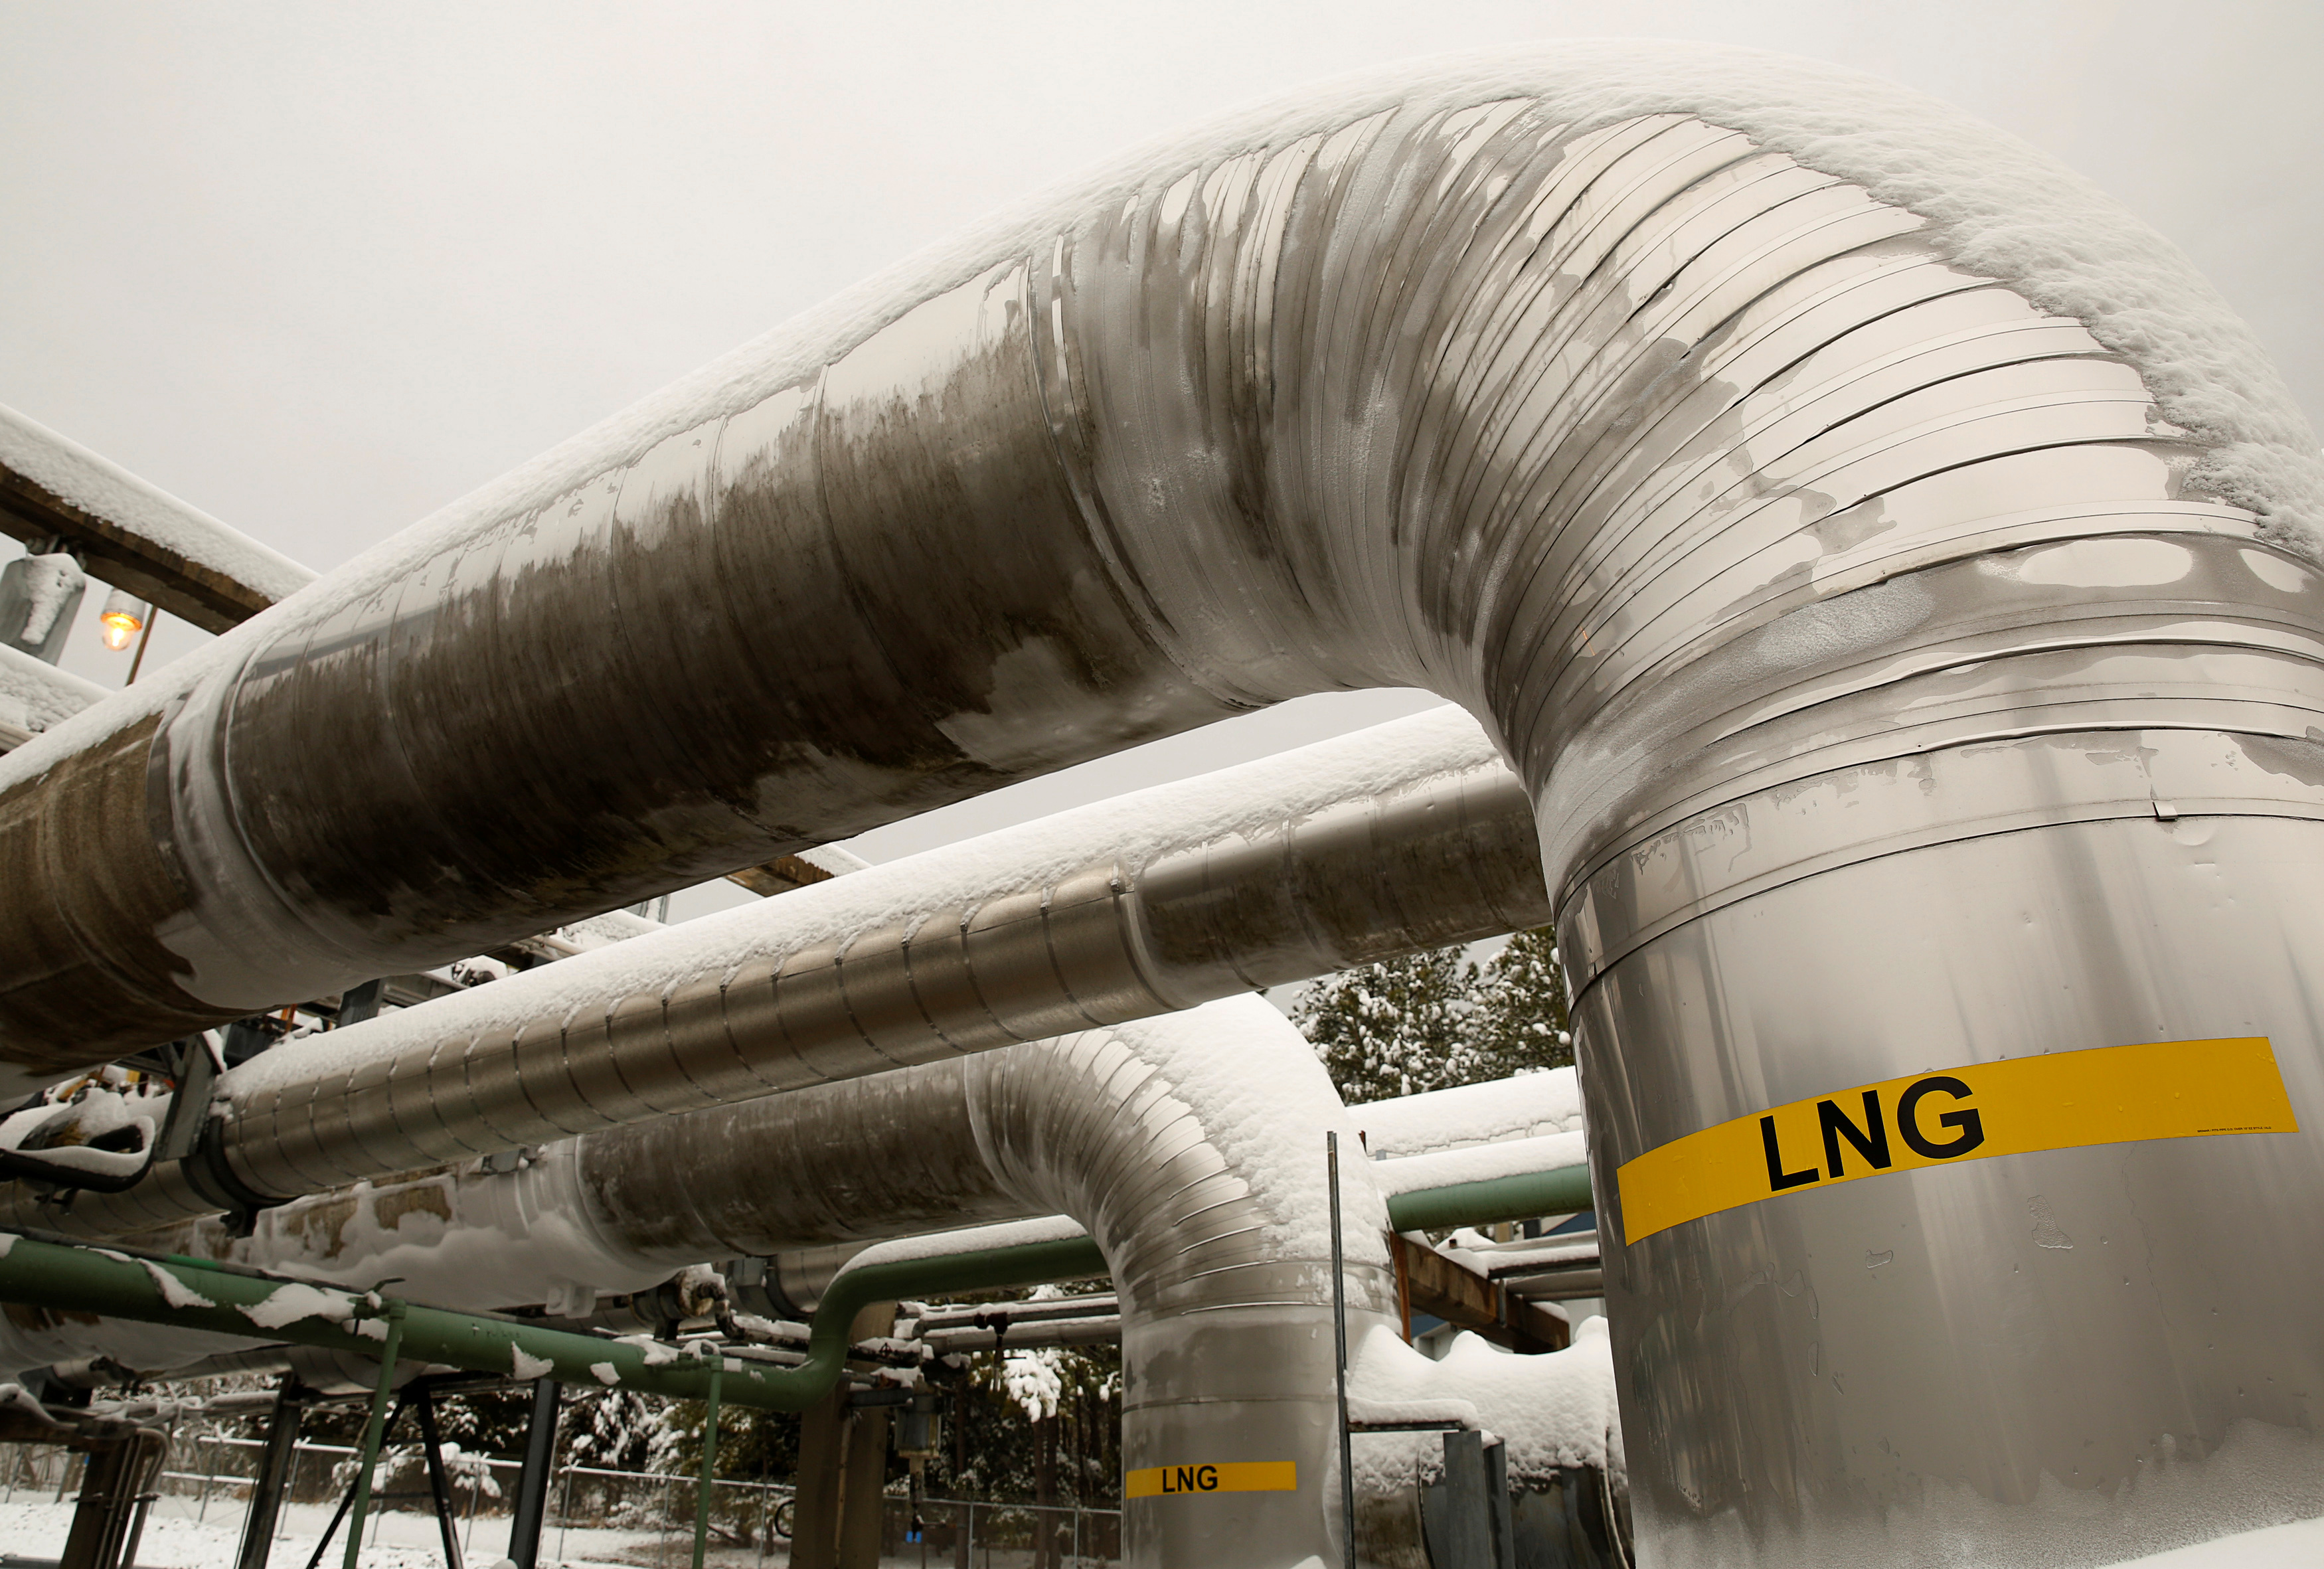 Snow covered transfer lines are seen at the Dominion Cove Point Liquefied Natural Gas (LNG) terminal in Lusby, Maryland March 18, 2014. REUTERS/Gary Cameron 